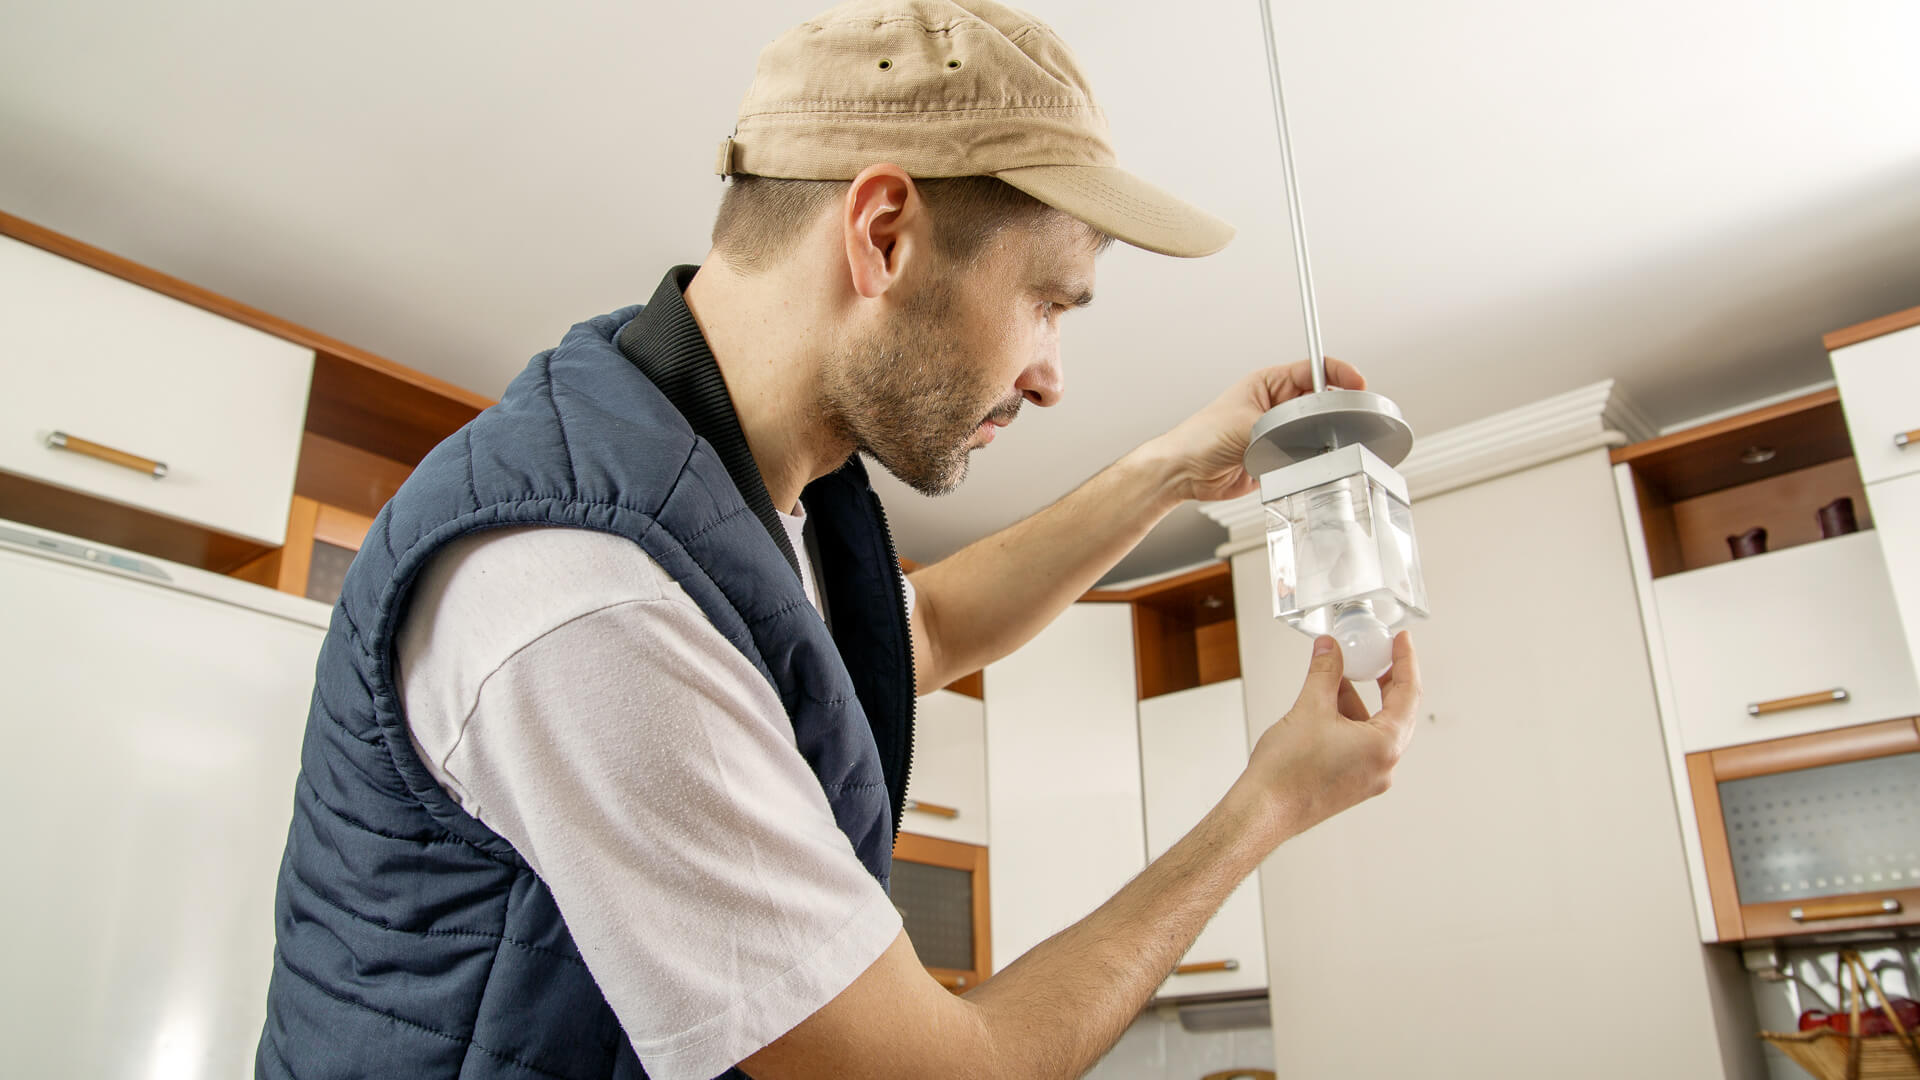 Are You Searching For Home Repair Services In Harrisburg?